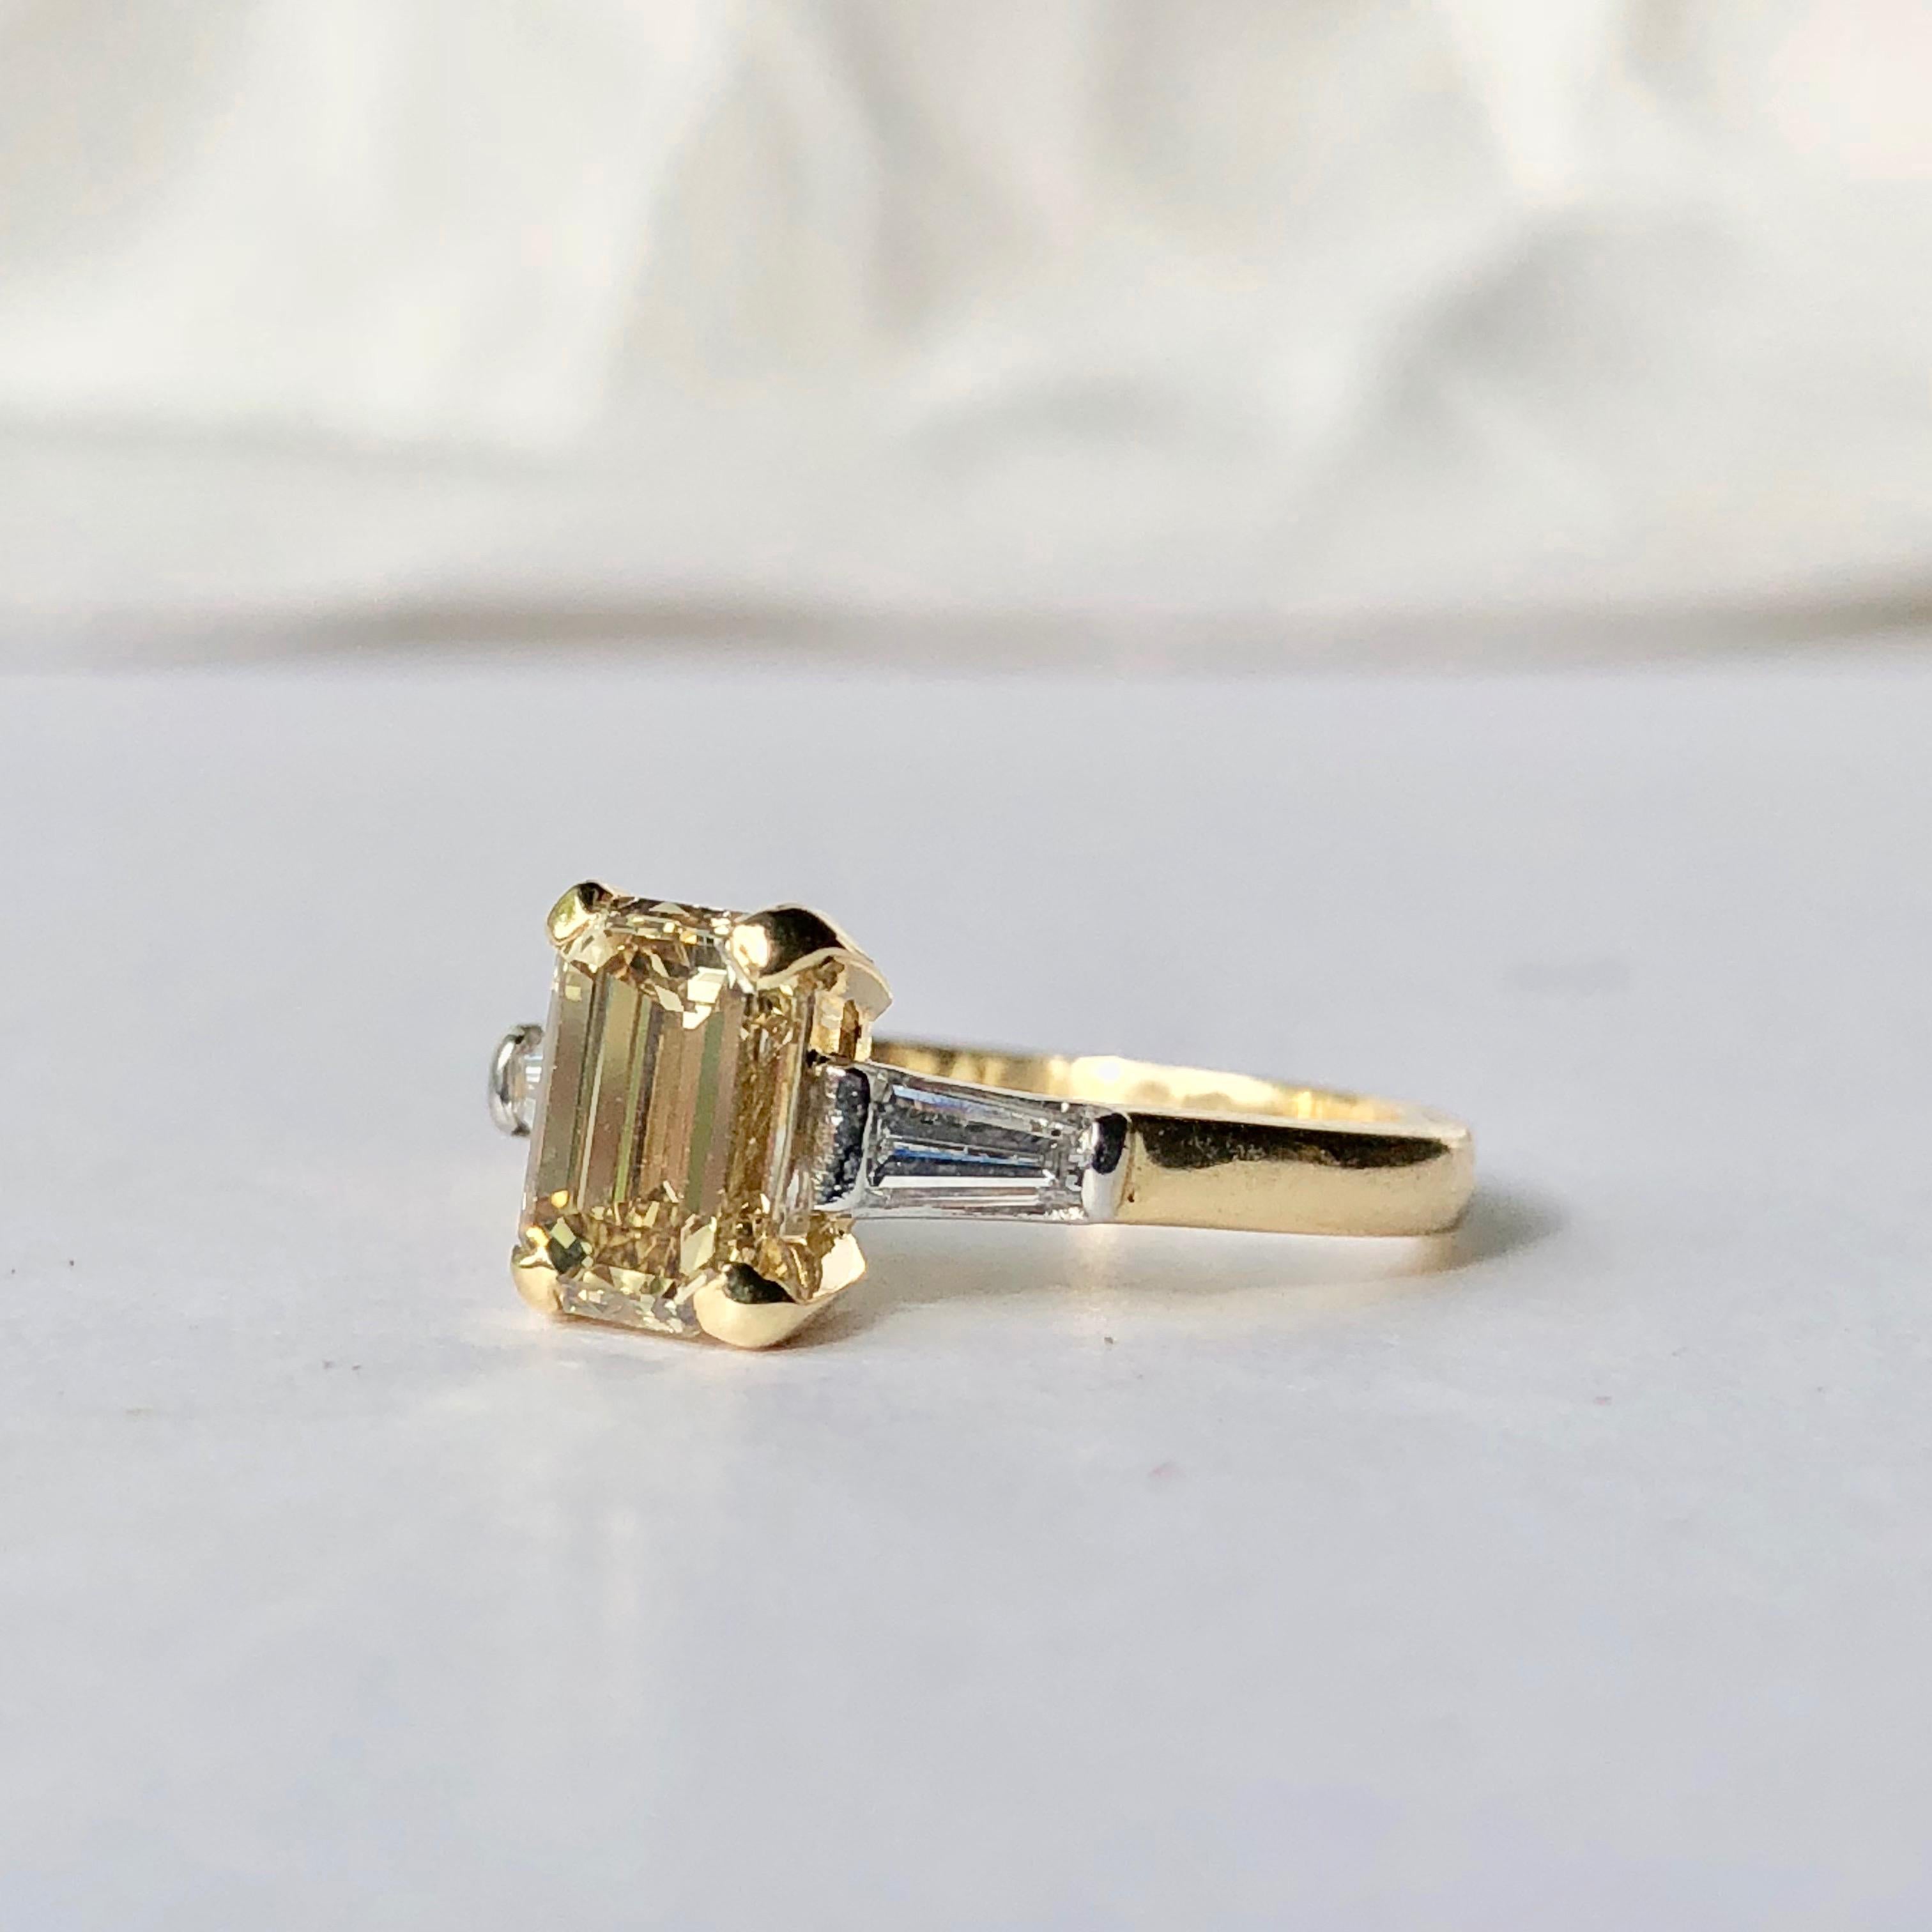 An Elegant Step Cut Yellow Diamond Ring 

The Principal Diamond Set In 18K Yellow Gold Four Claw Setting With White Tapered Baguette Diamond Shoulder Stones.

The Yellow Diamond is VS Clarity  and Weighs An Estimated 1.01cts With 0.26ct White